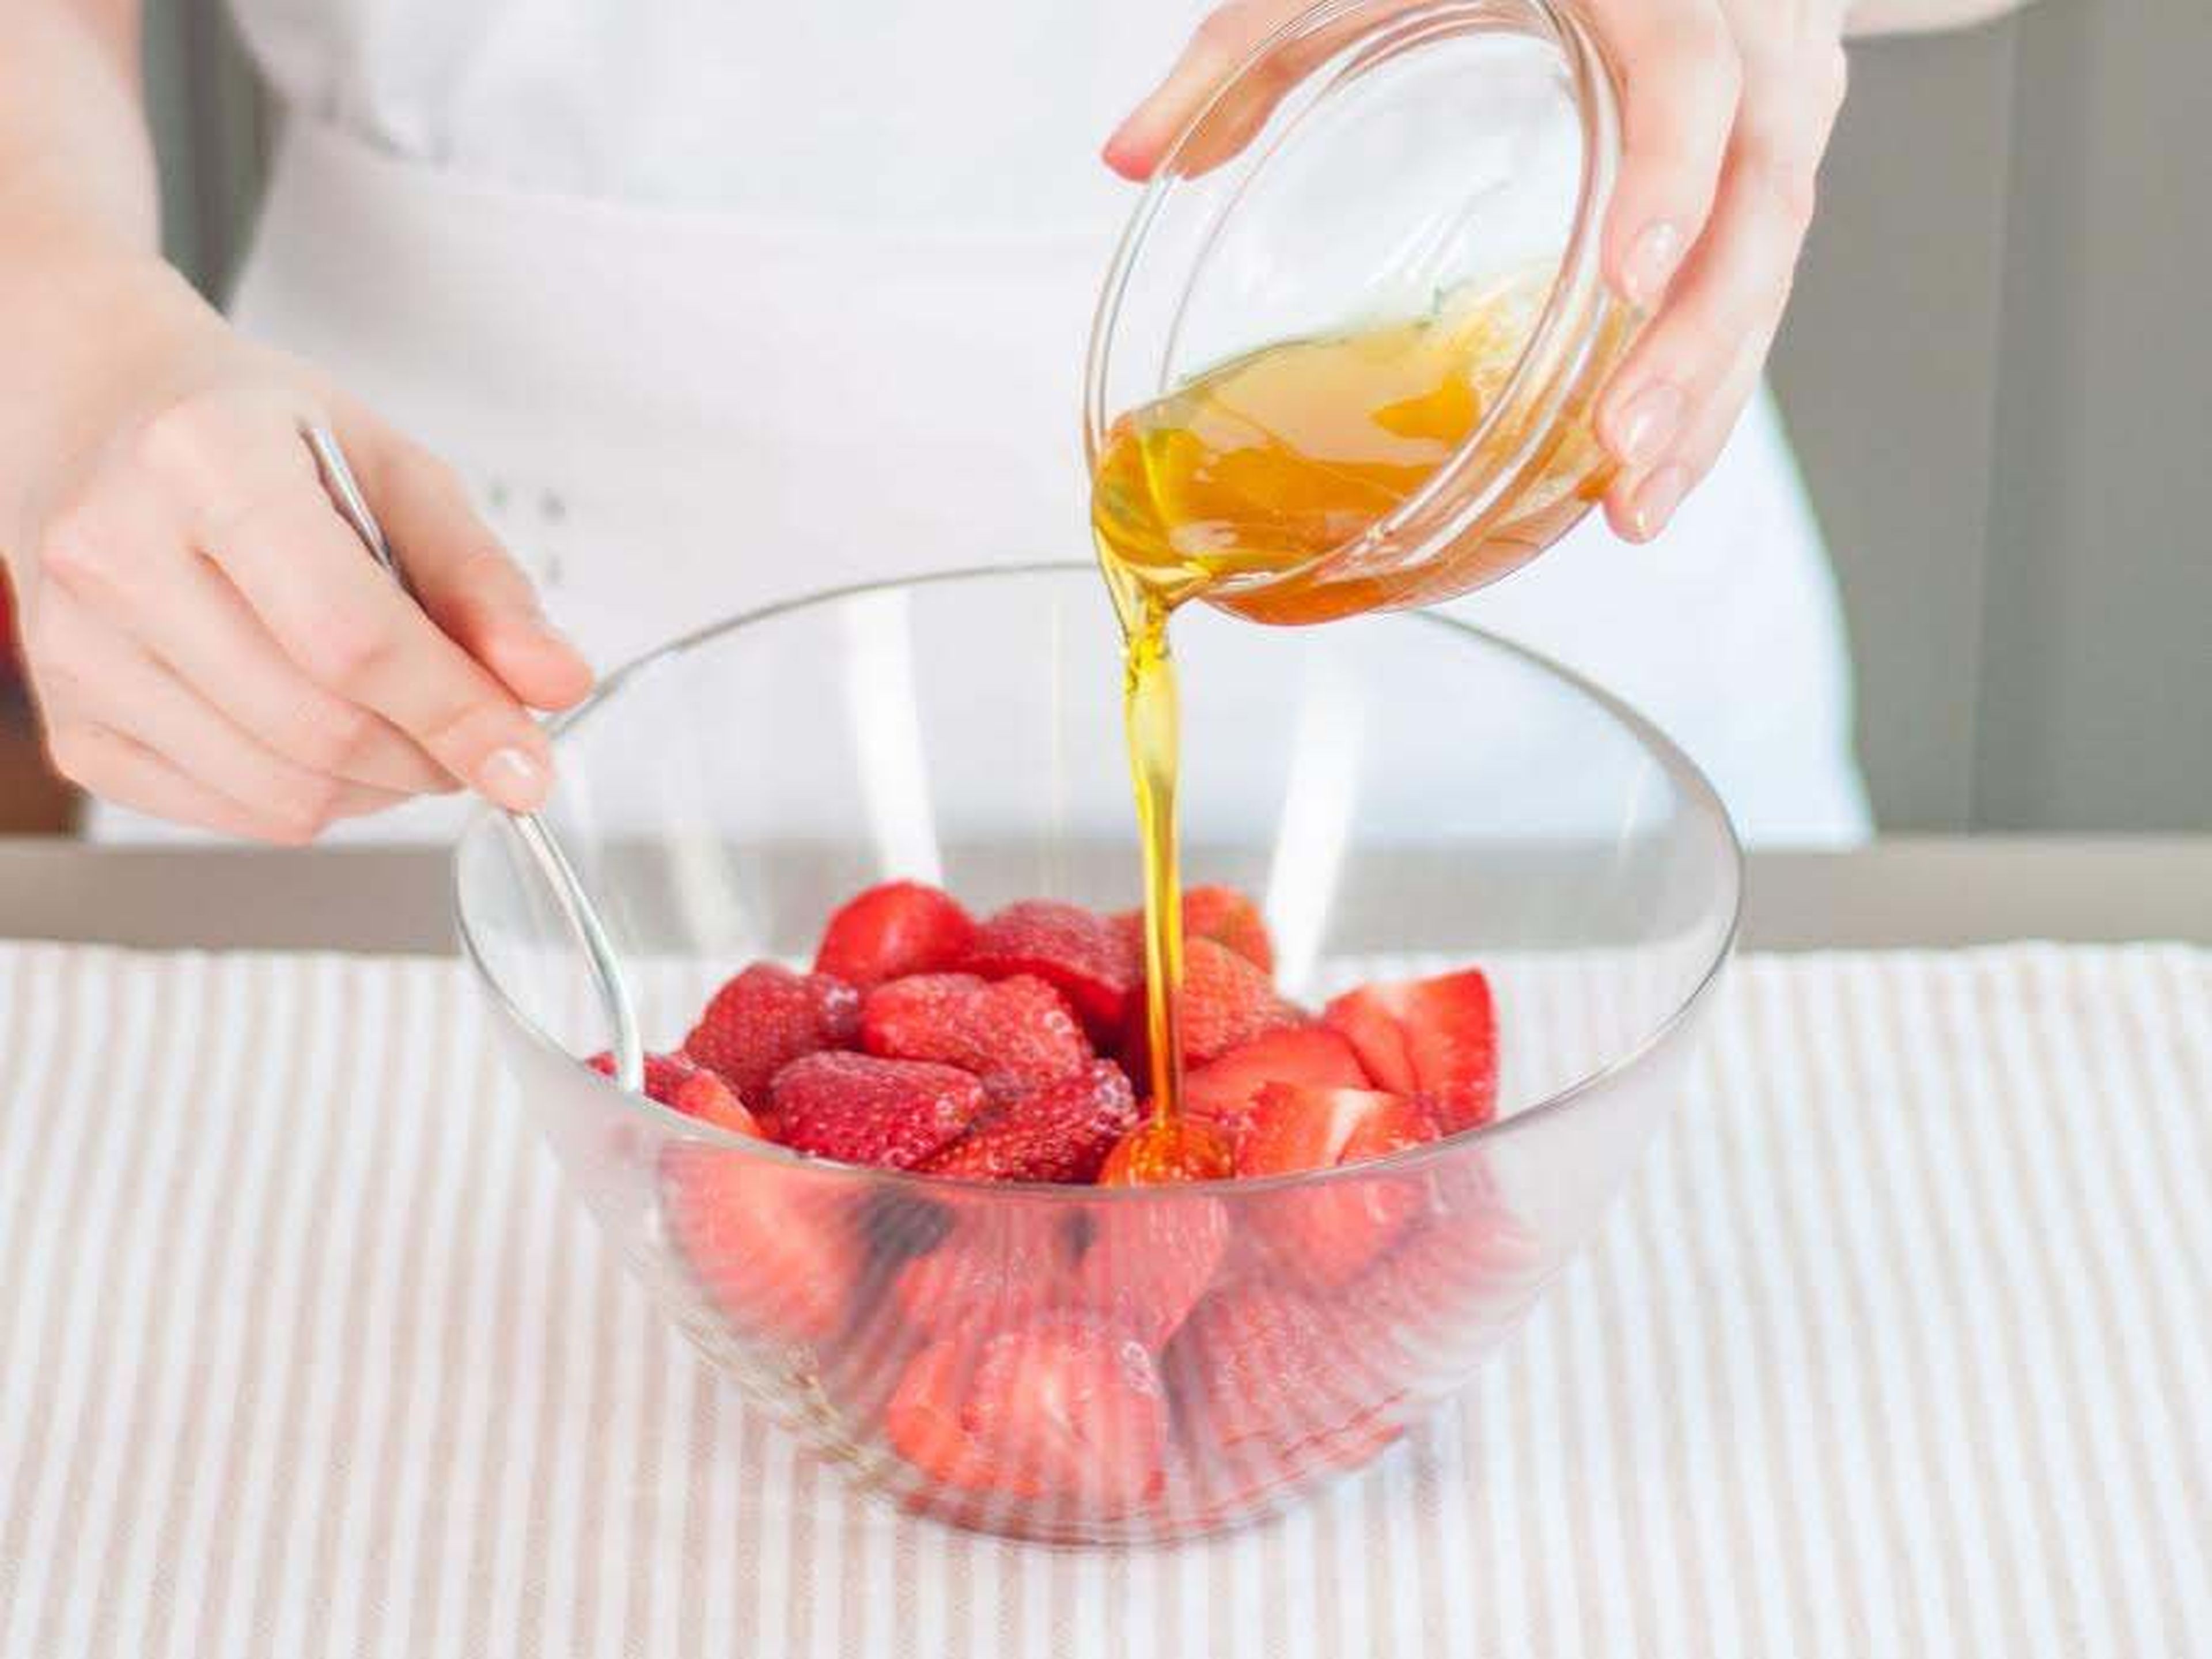 Whisk together honey, olive oil, and some of the salt. Pour over strawberries and mix to coat.